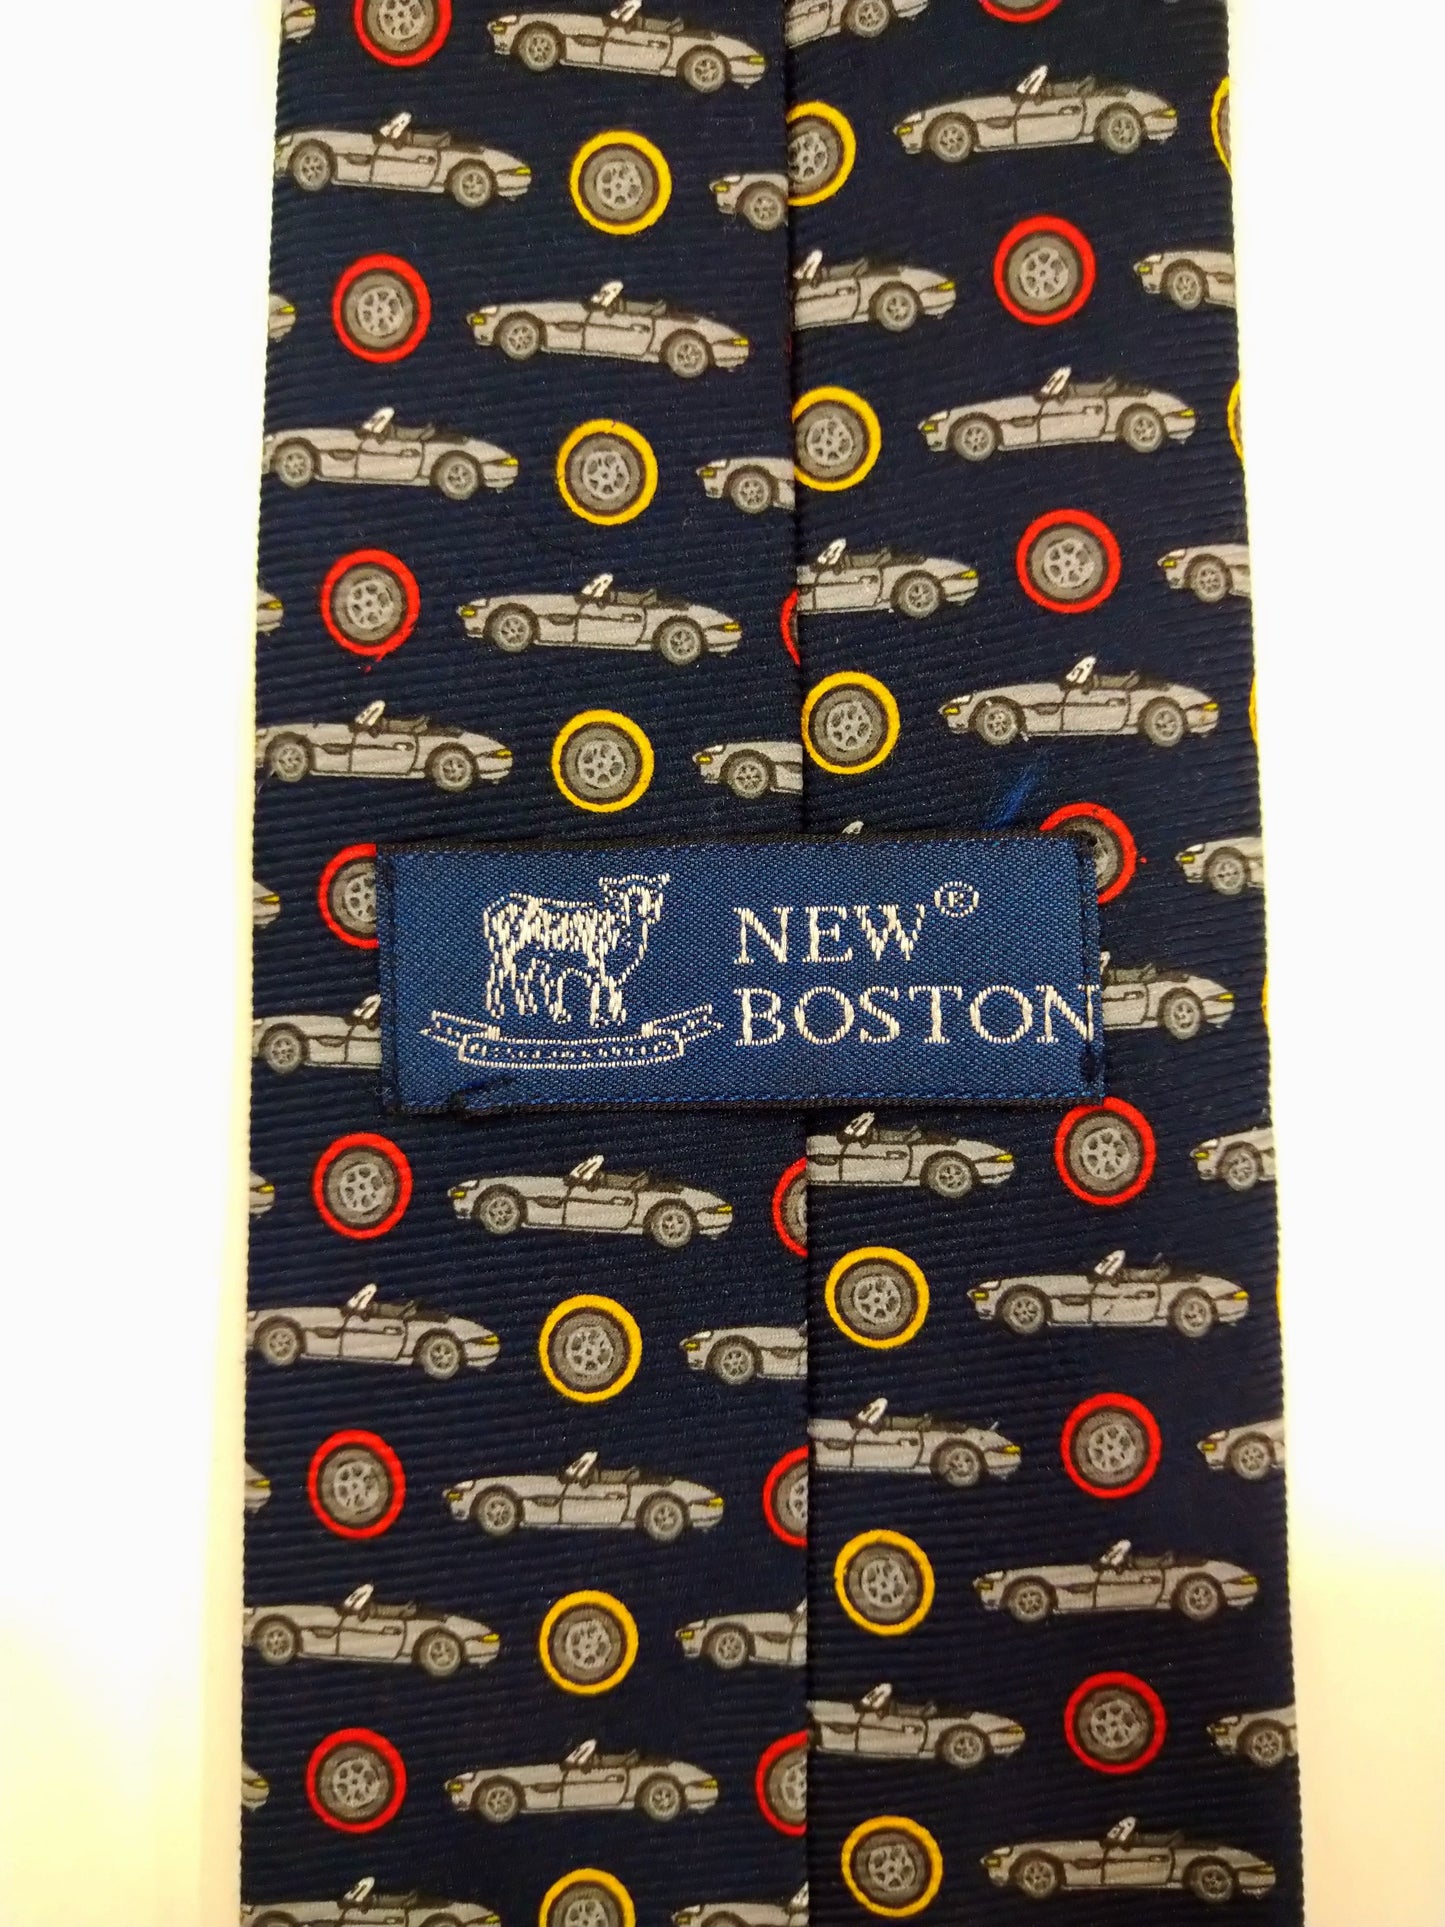 New Boston soft polyester tie. Blue with beautiful old -timer car motif.